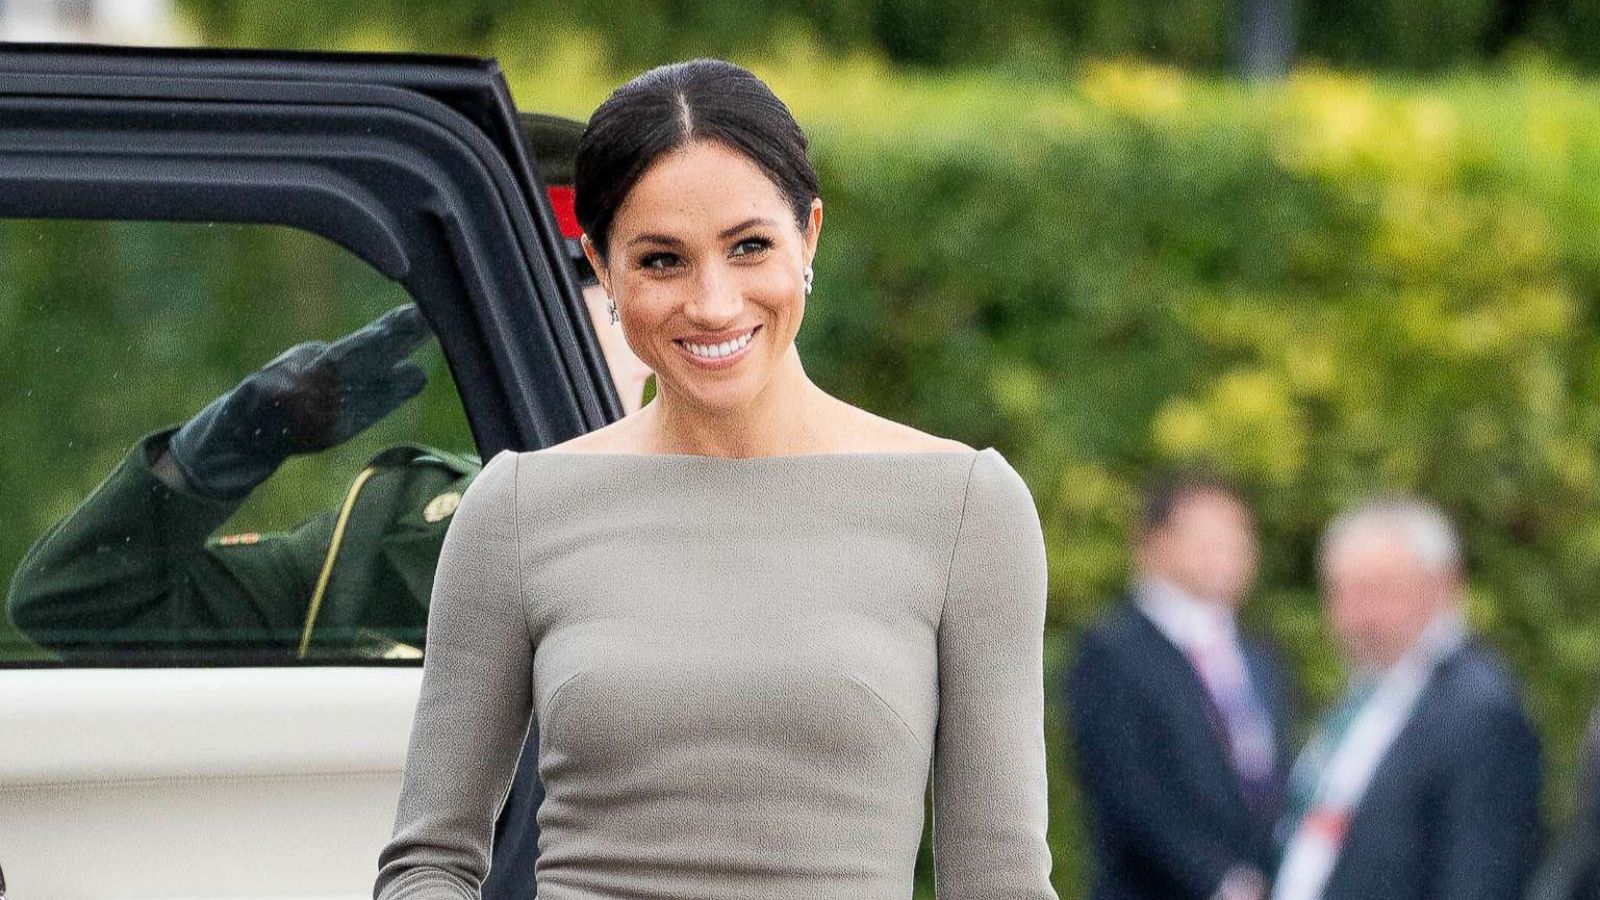 PHOTO: Meghan Markle, Duchess of Sussex visits Dublin, July 11, 2018.